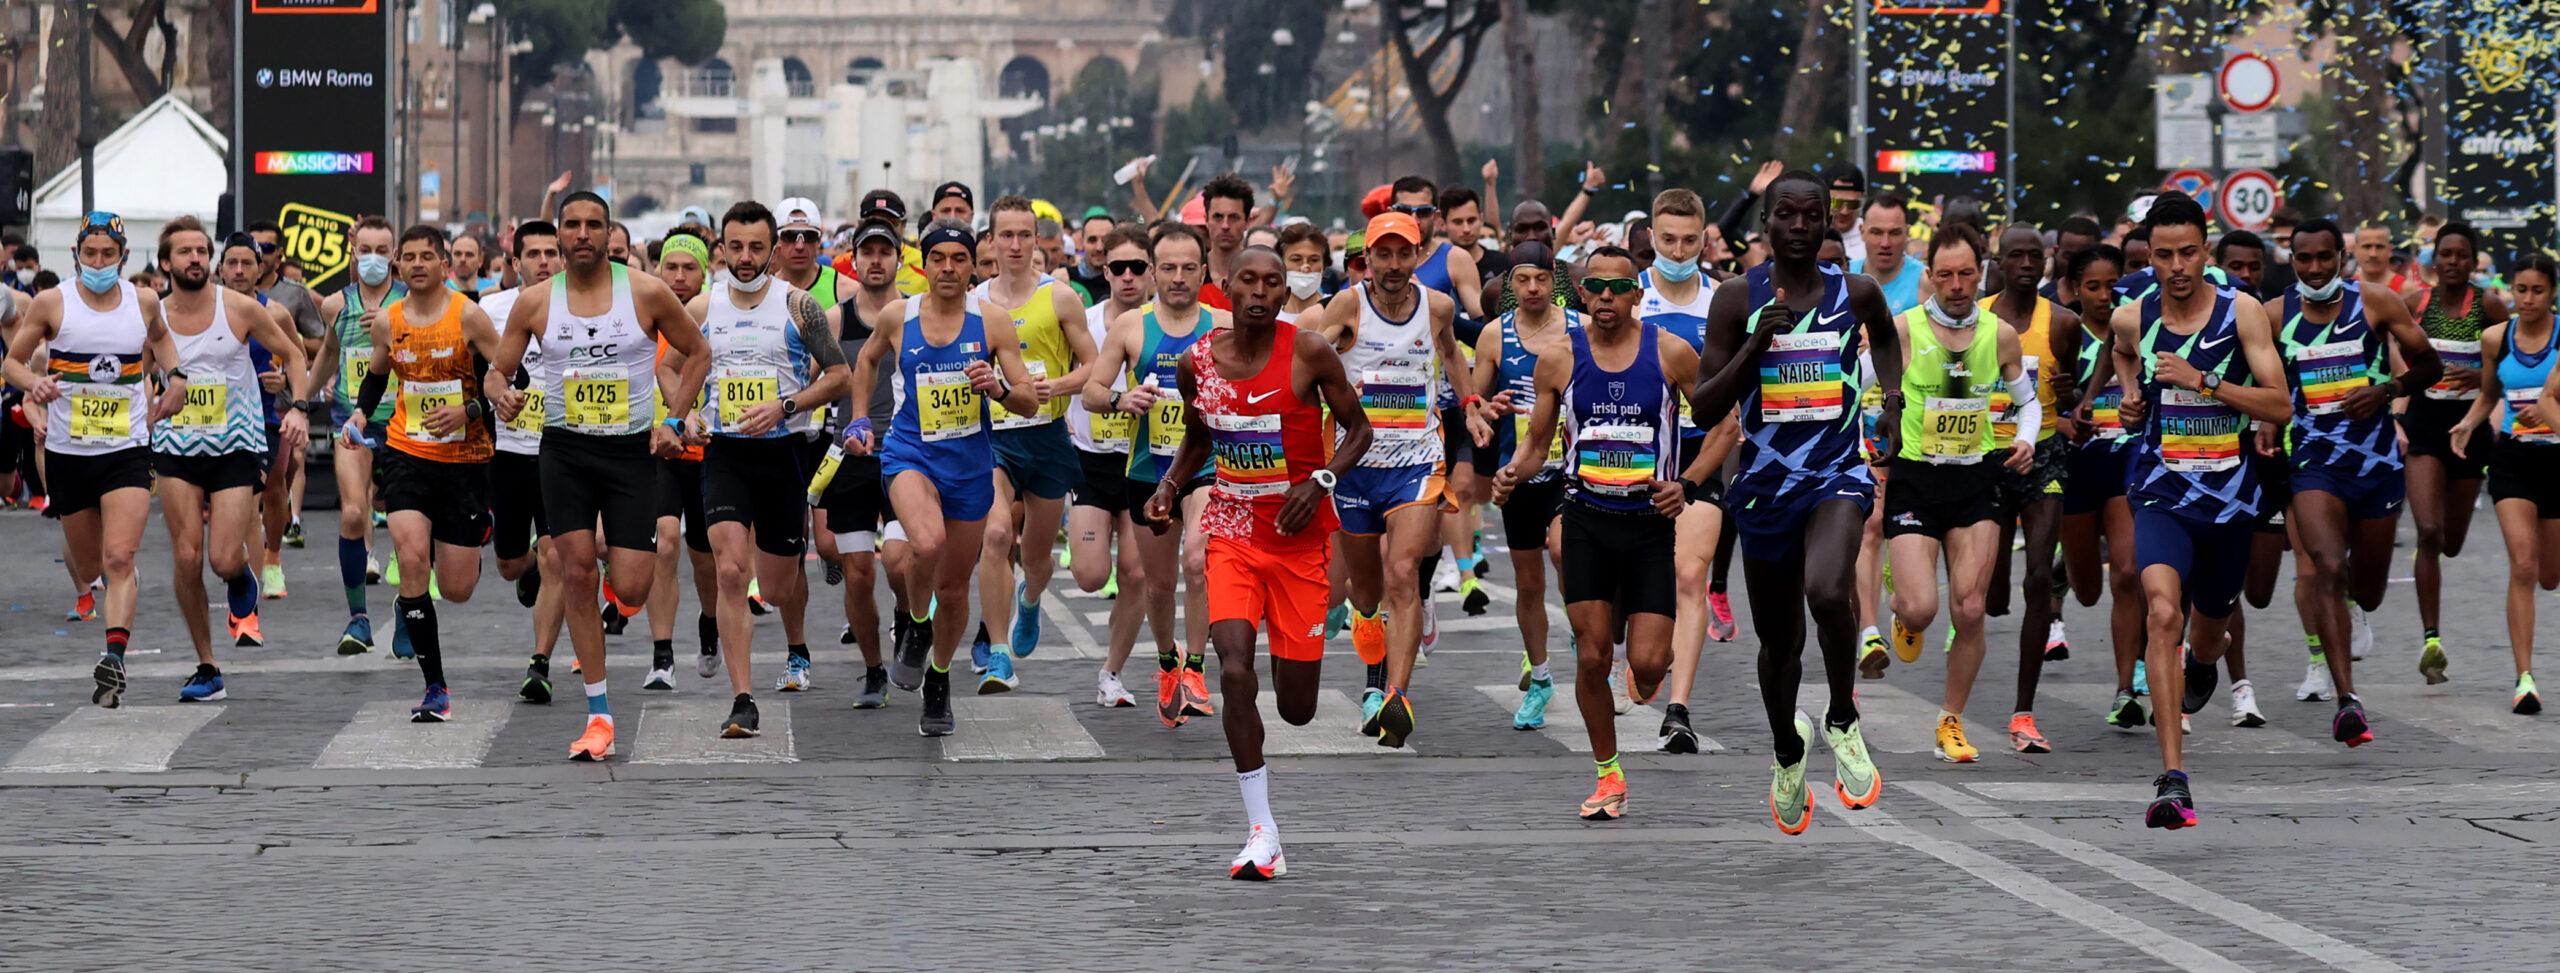 Ethiopia’s Bekele Fikre Tefera sets the course record with 2:06:48 at the Acea Run Rome The Marathon